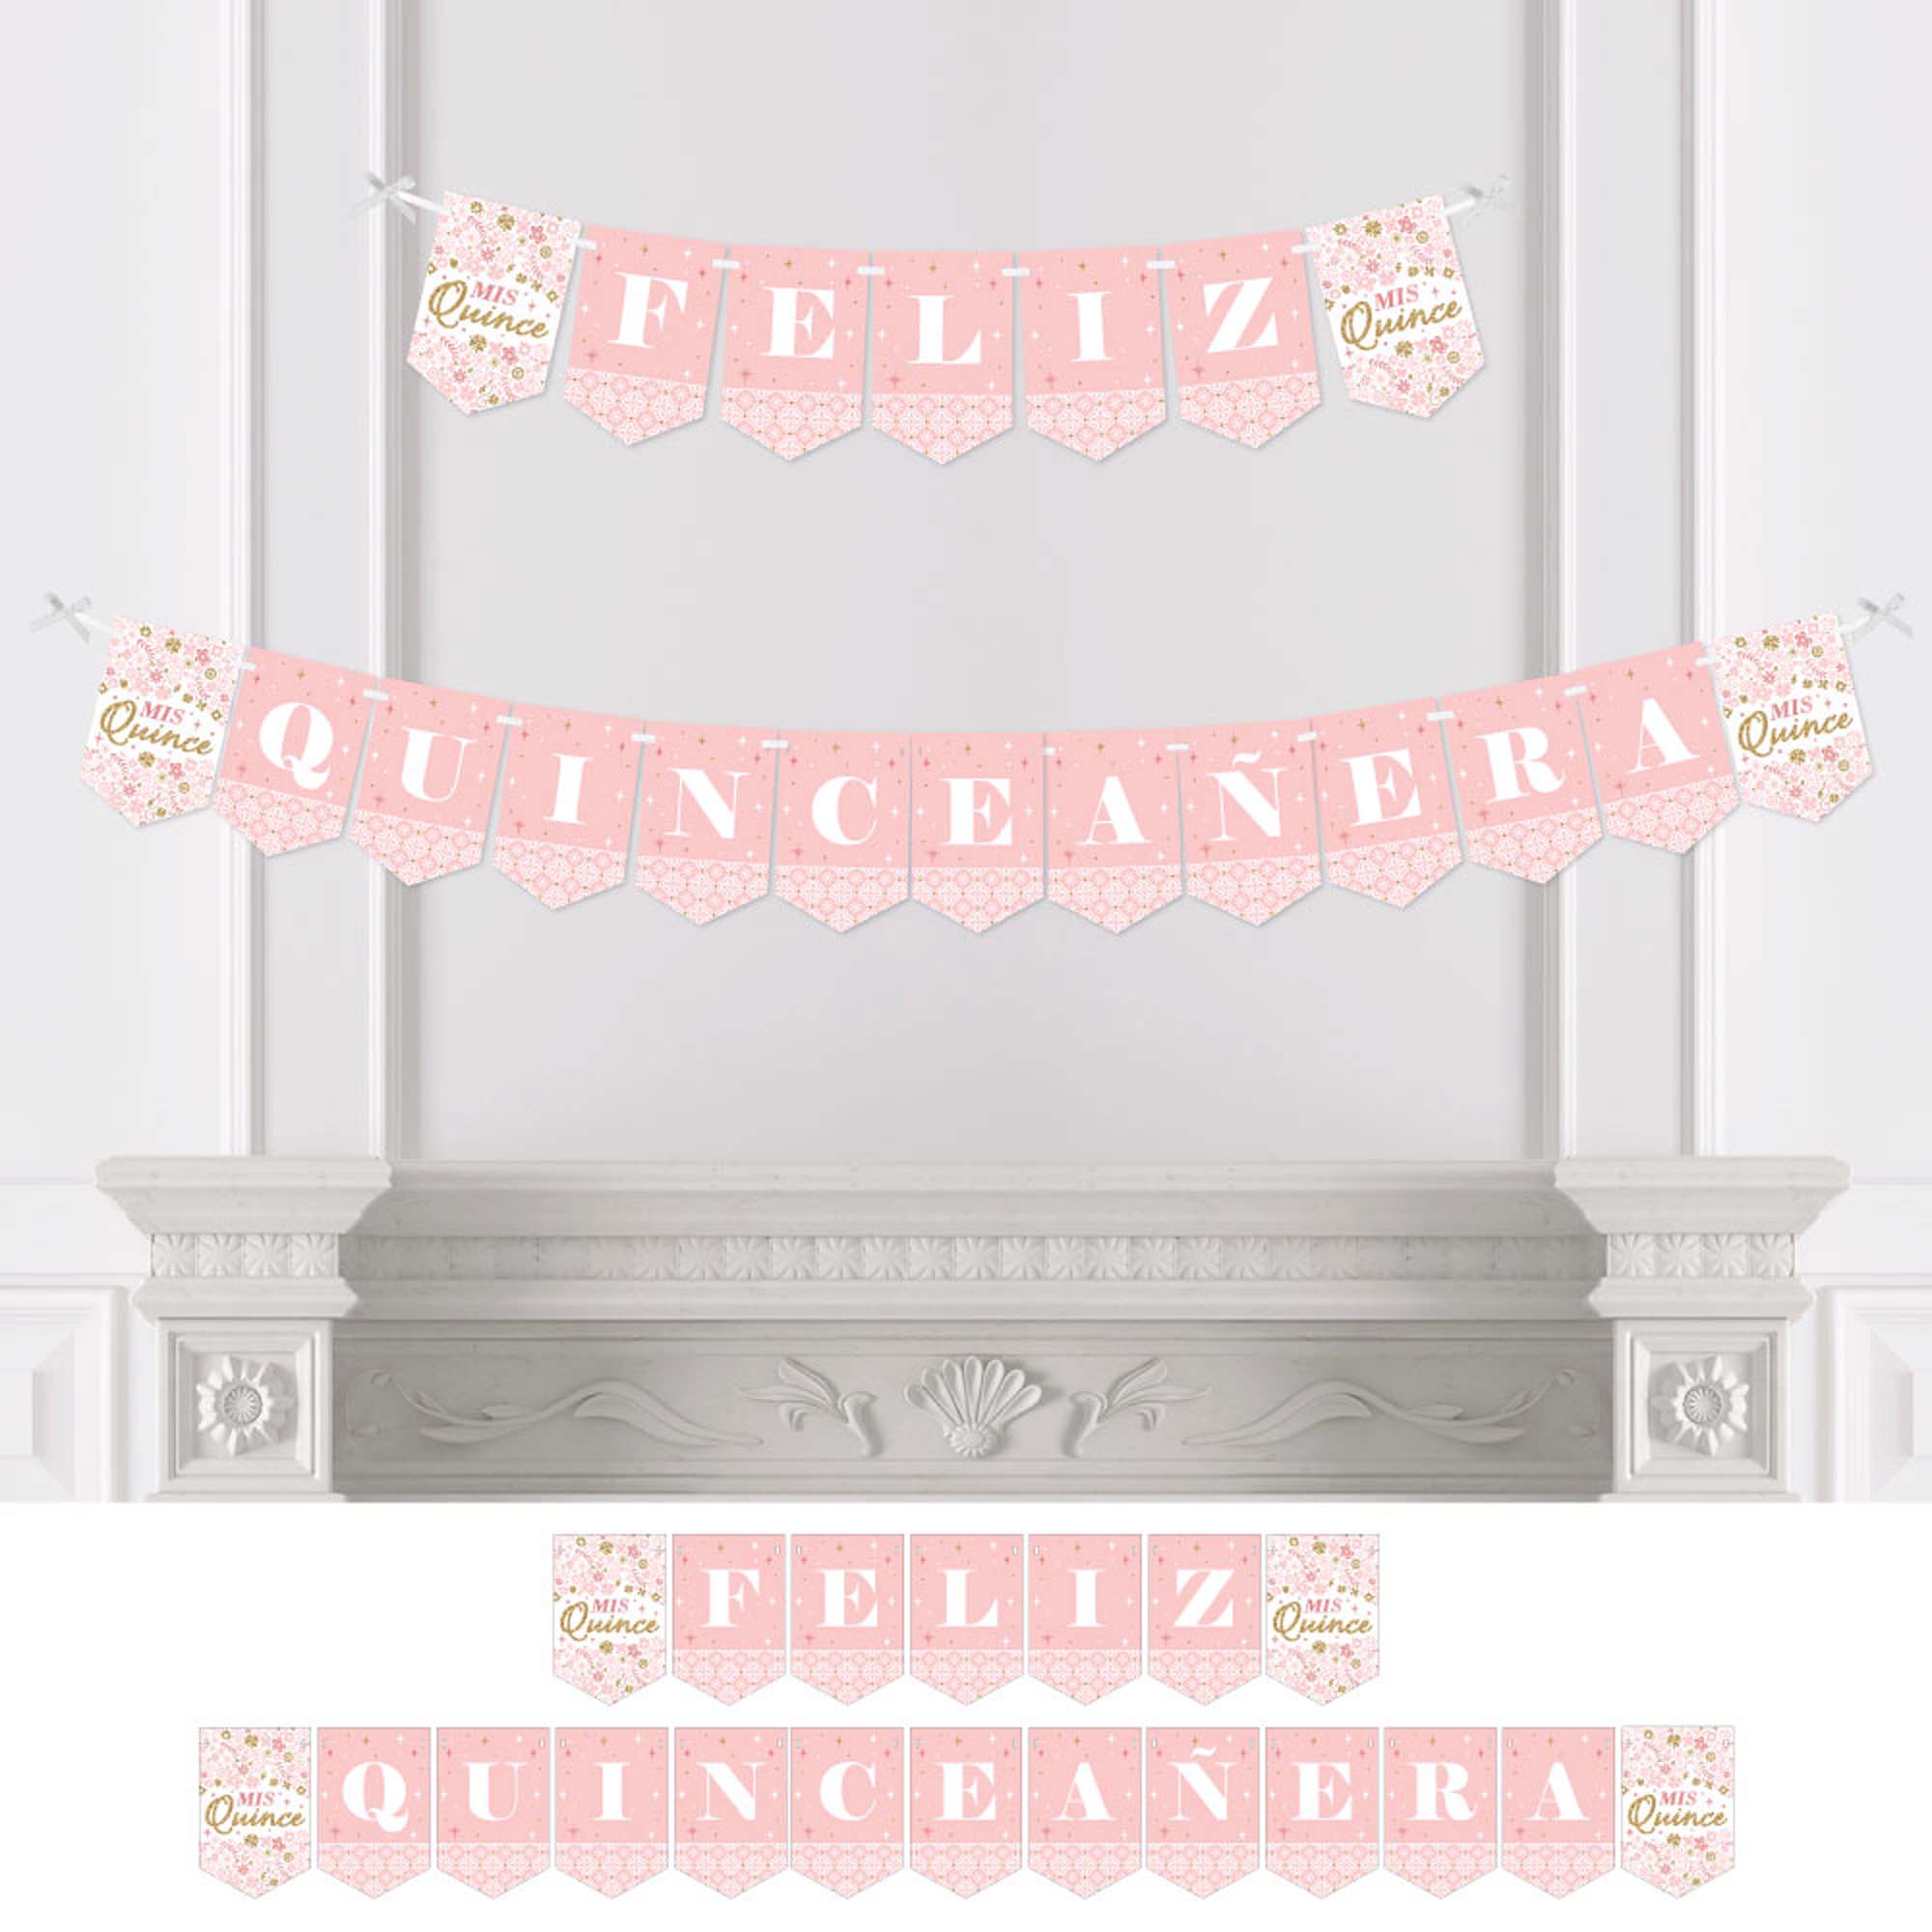 Quinceanera party decorations for quinceanera banner quinceanera gift ideas quinceanera quince gift ideas